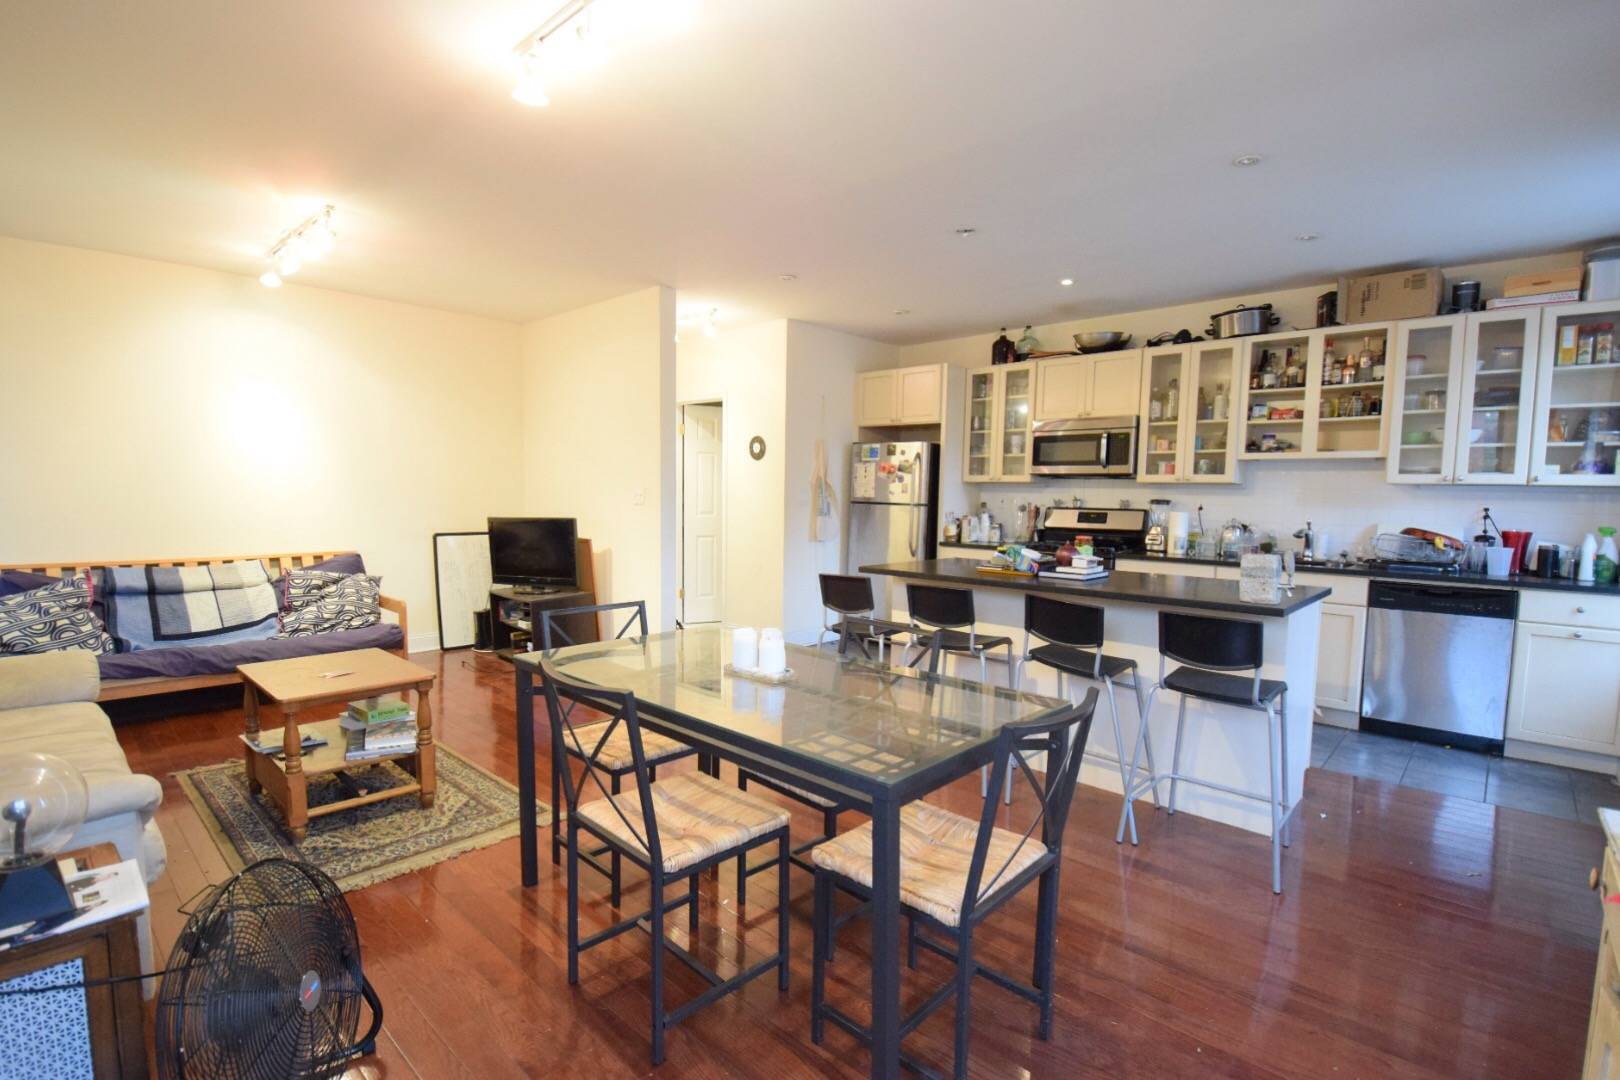 Private duplex apartment in prime Fort Greene, only unit in the building.